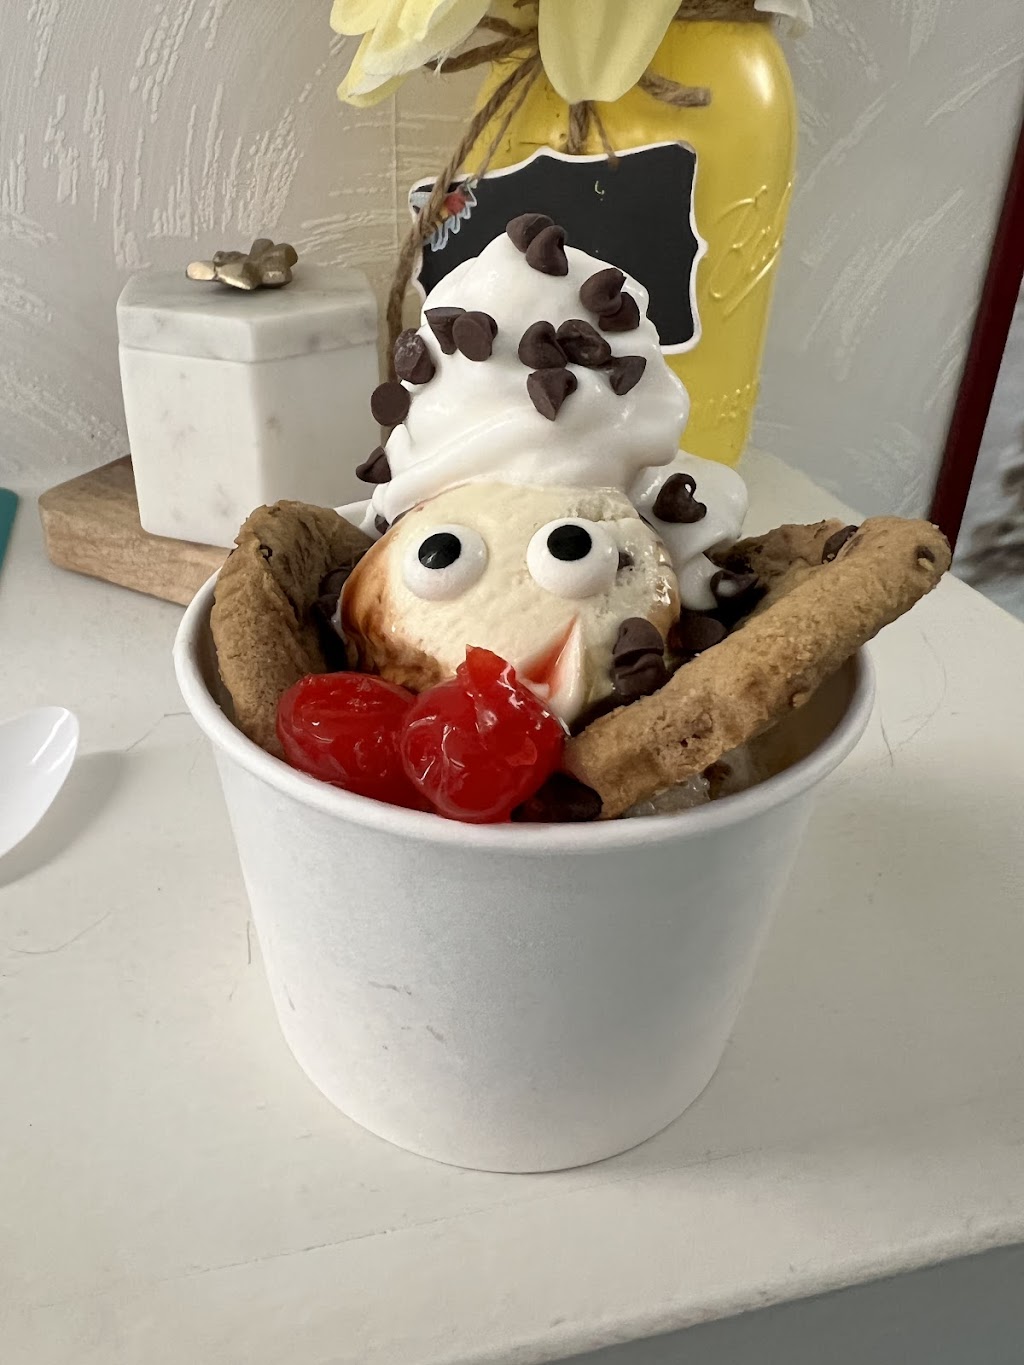 Honey Bees Cafe and Ice Cream | 110 N Main St, Lakeview, OH 43331 | Phone: (937) 633-0024